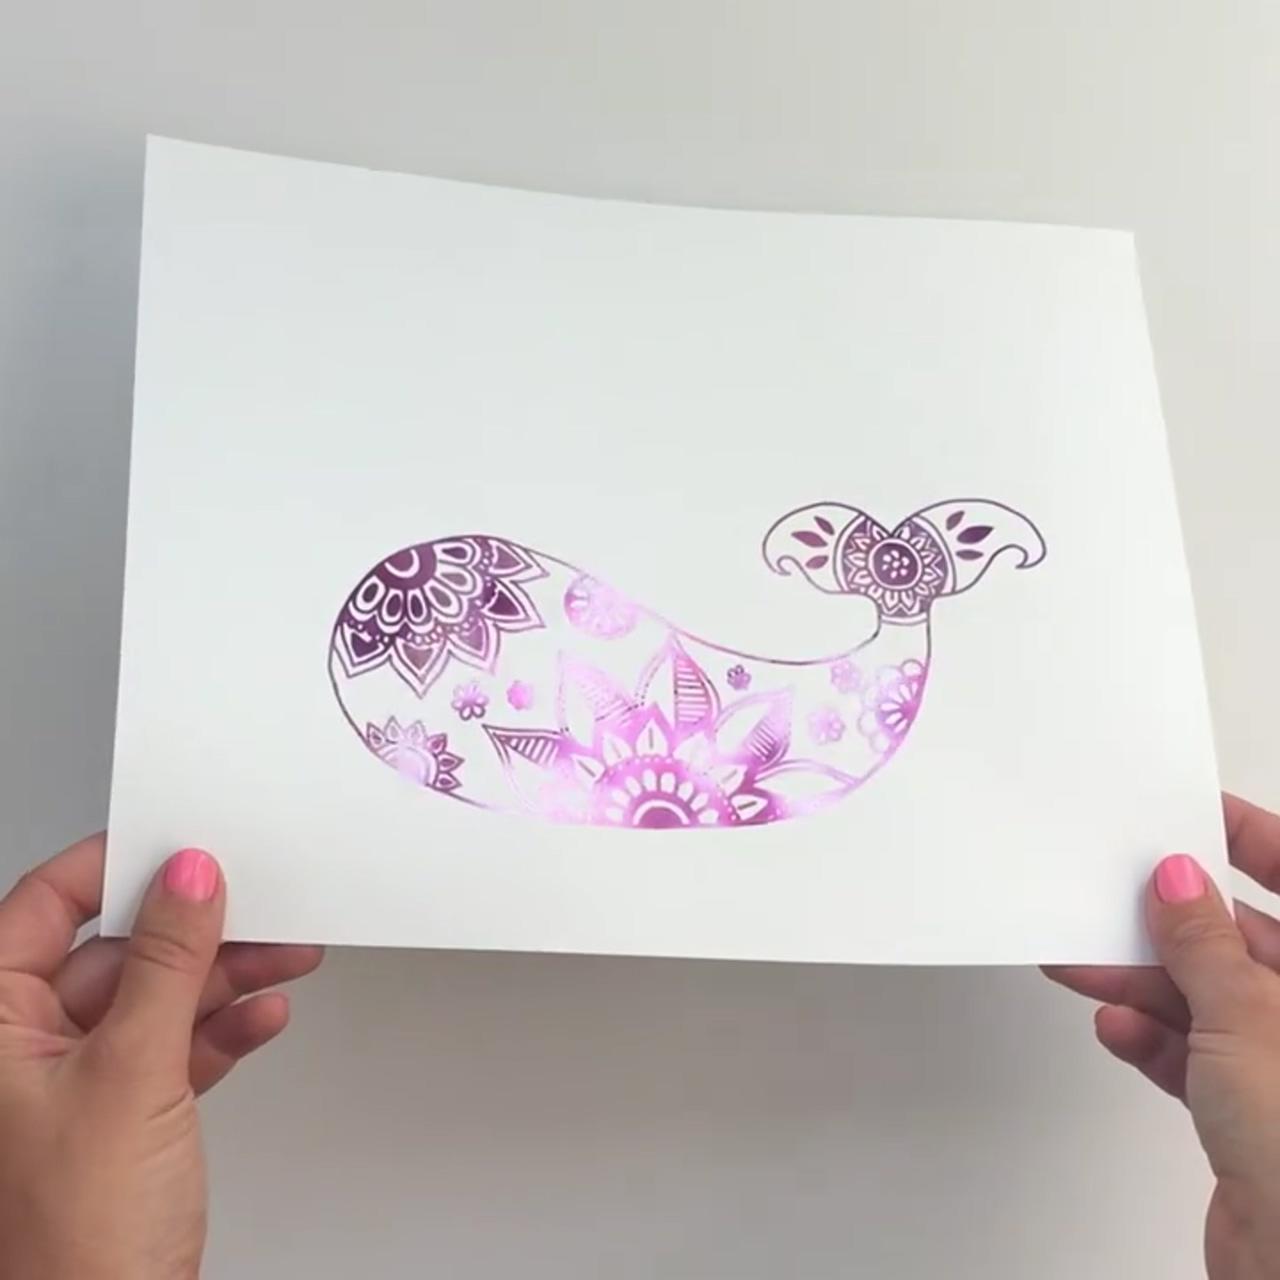 Diy foil art prints - how to make your own foil art o color made happy; watercolor crystals